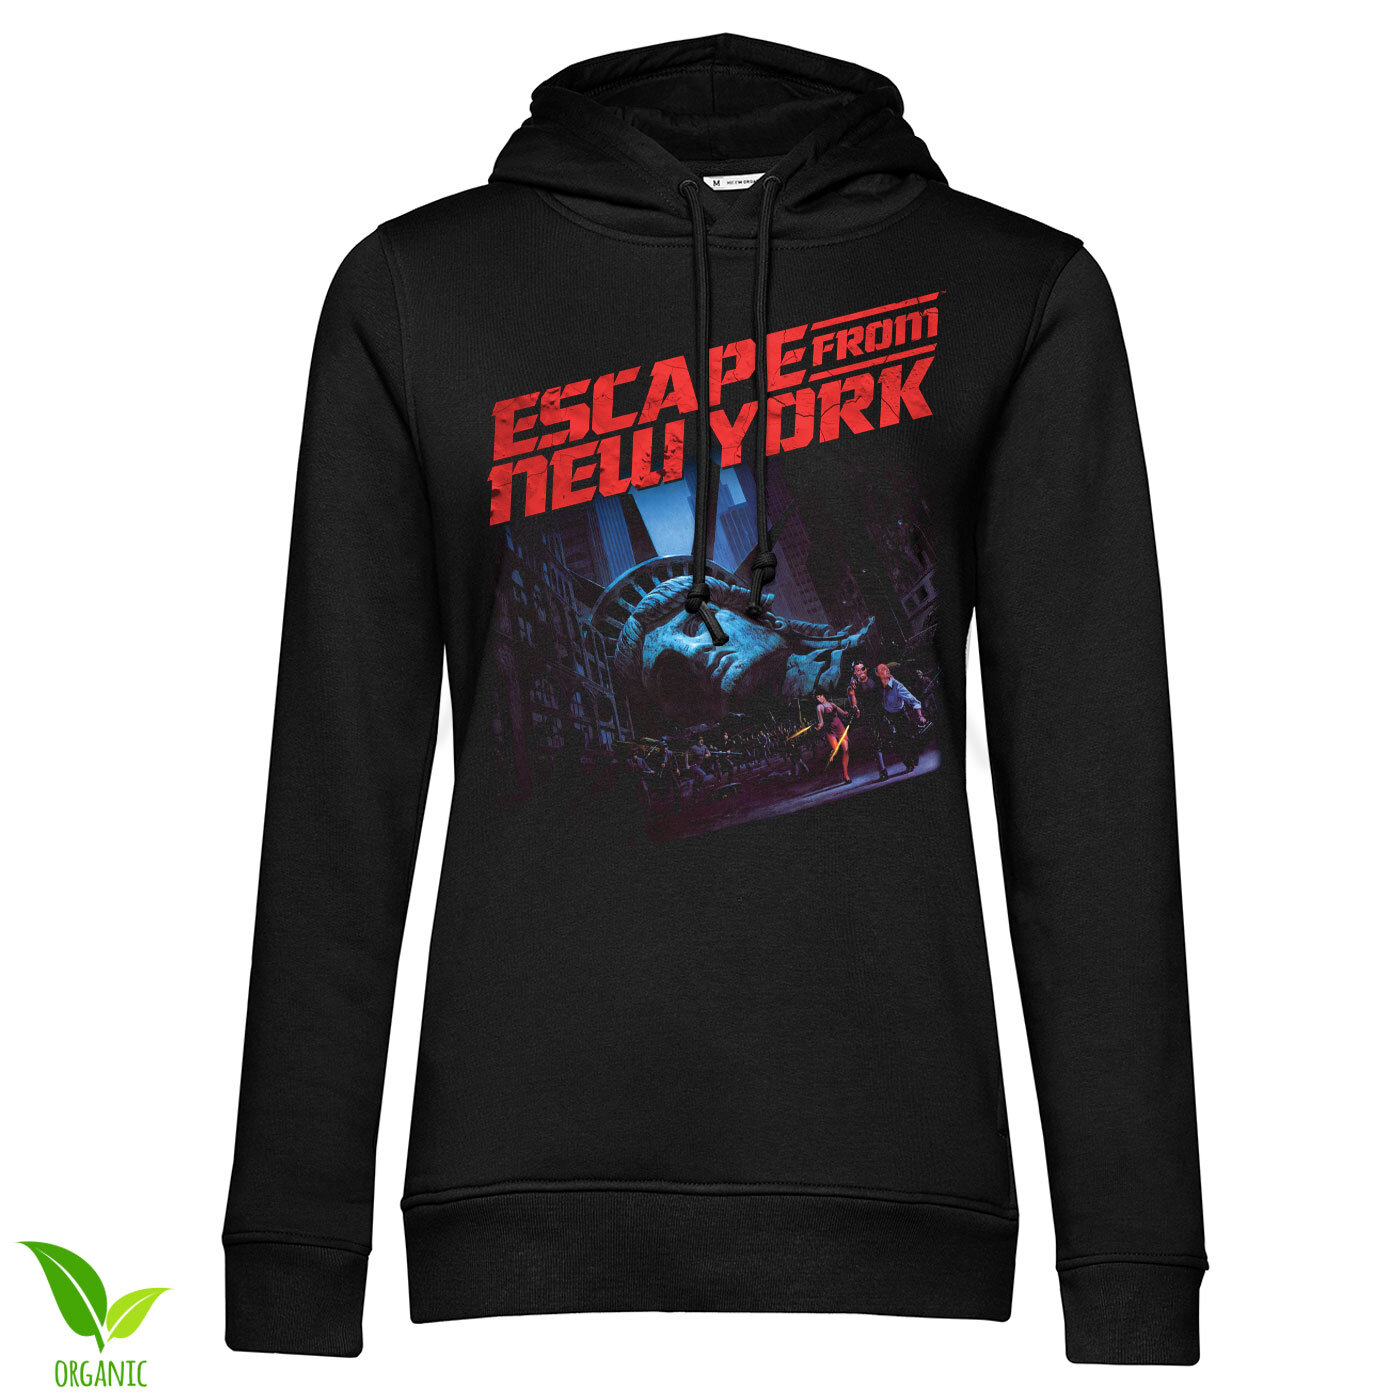 Escape From New York Poster Girls Hoodie